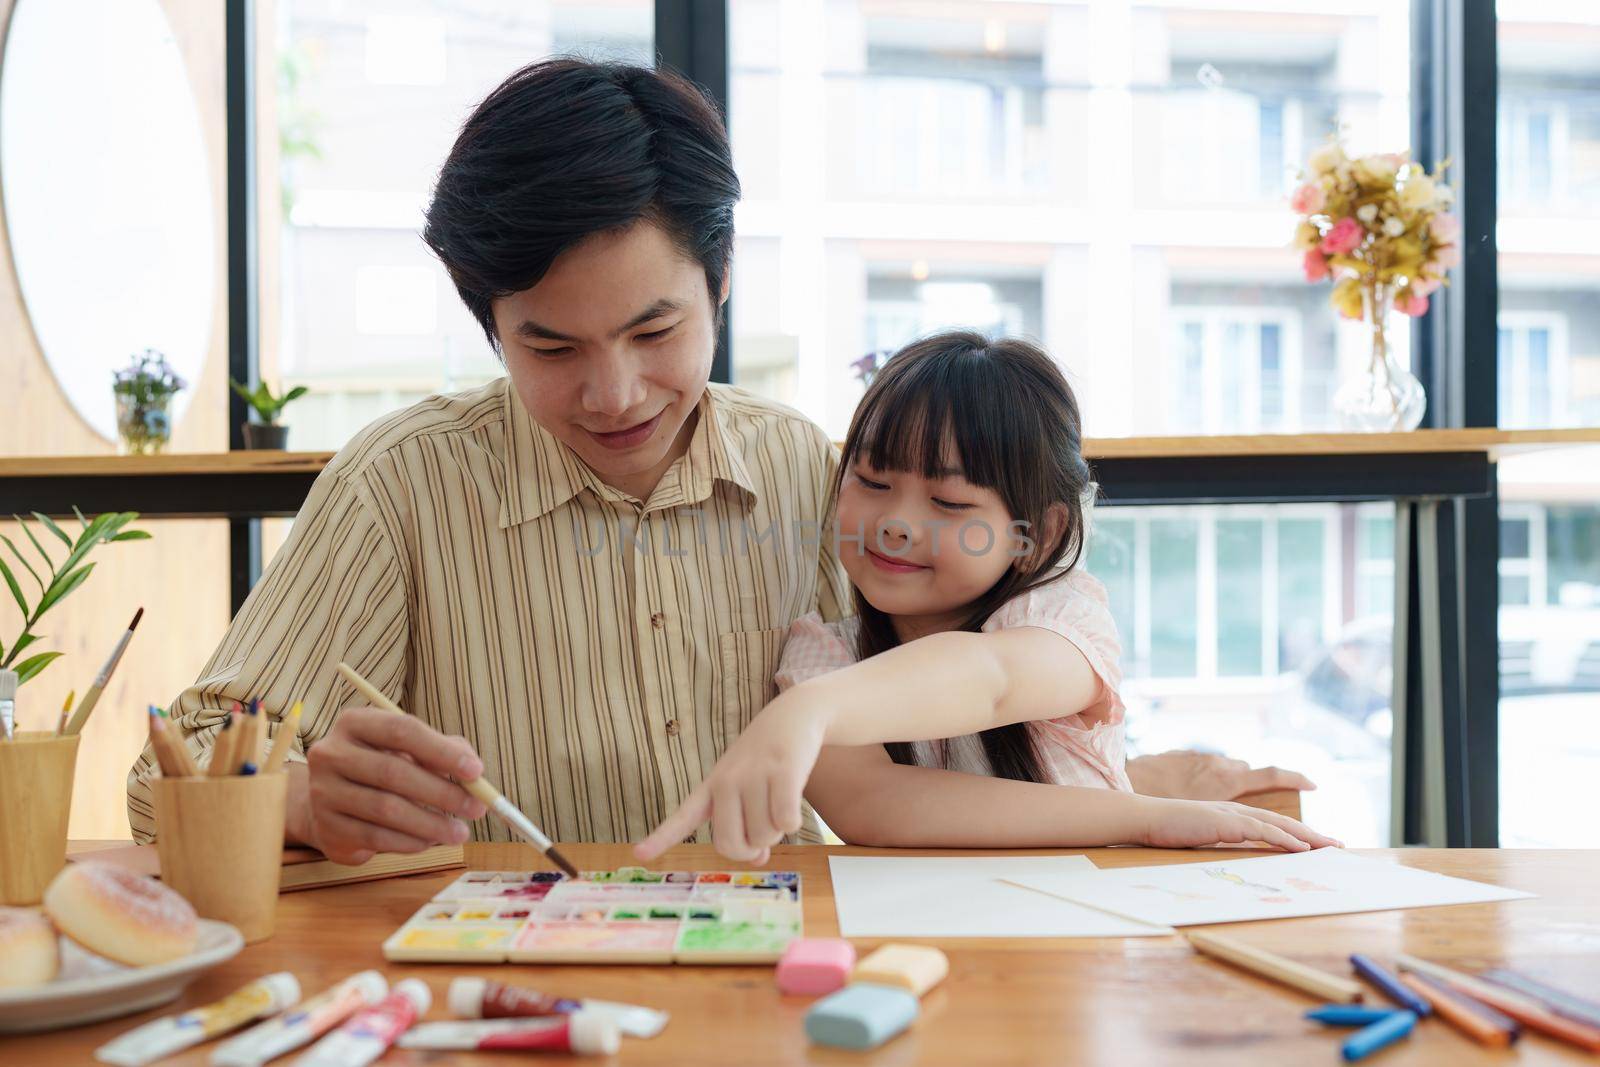 A happy kid and this father painting at home. Handmade skills training by itchaznong